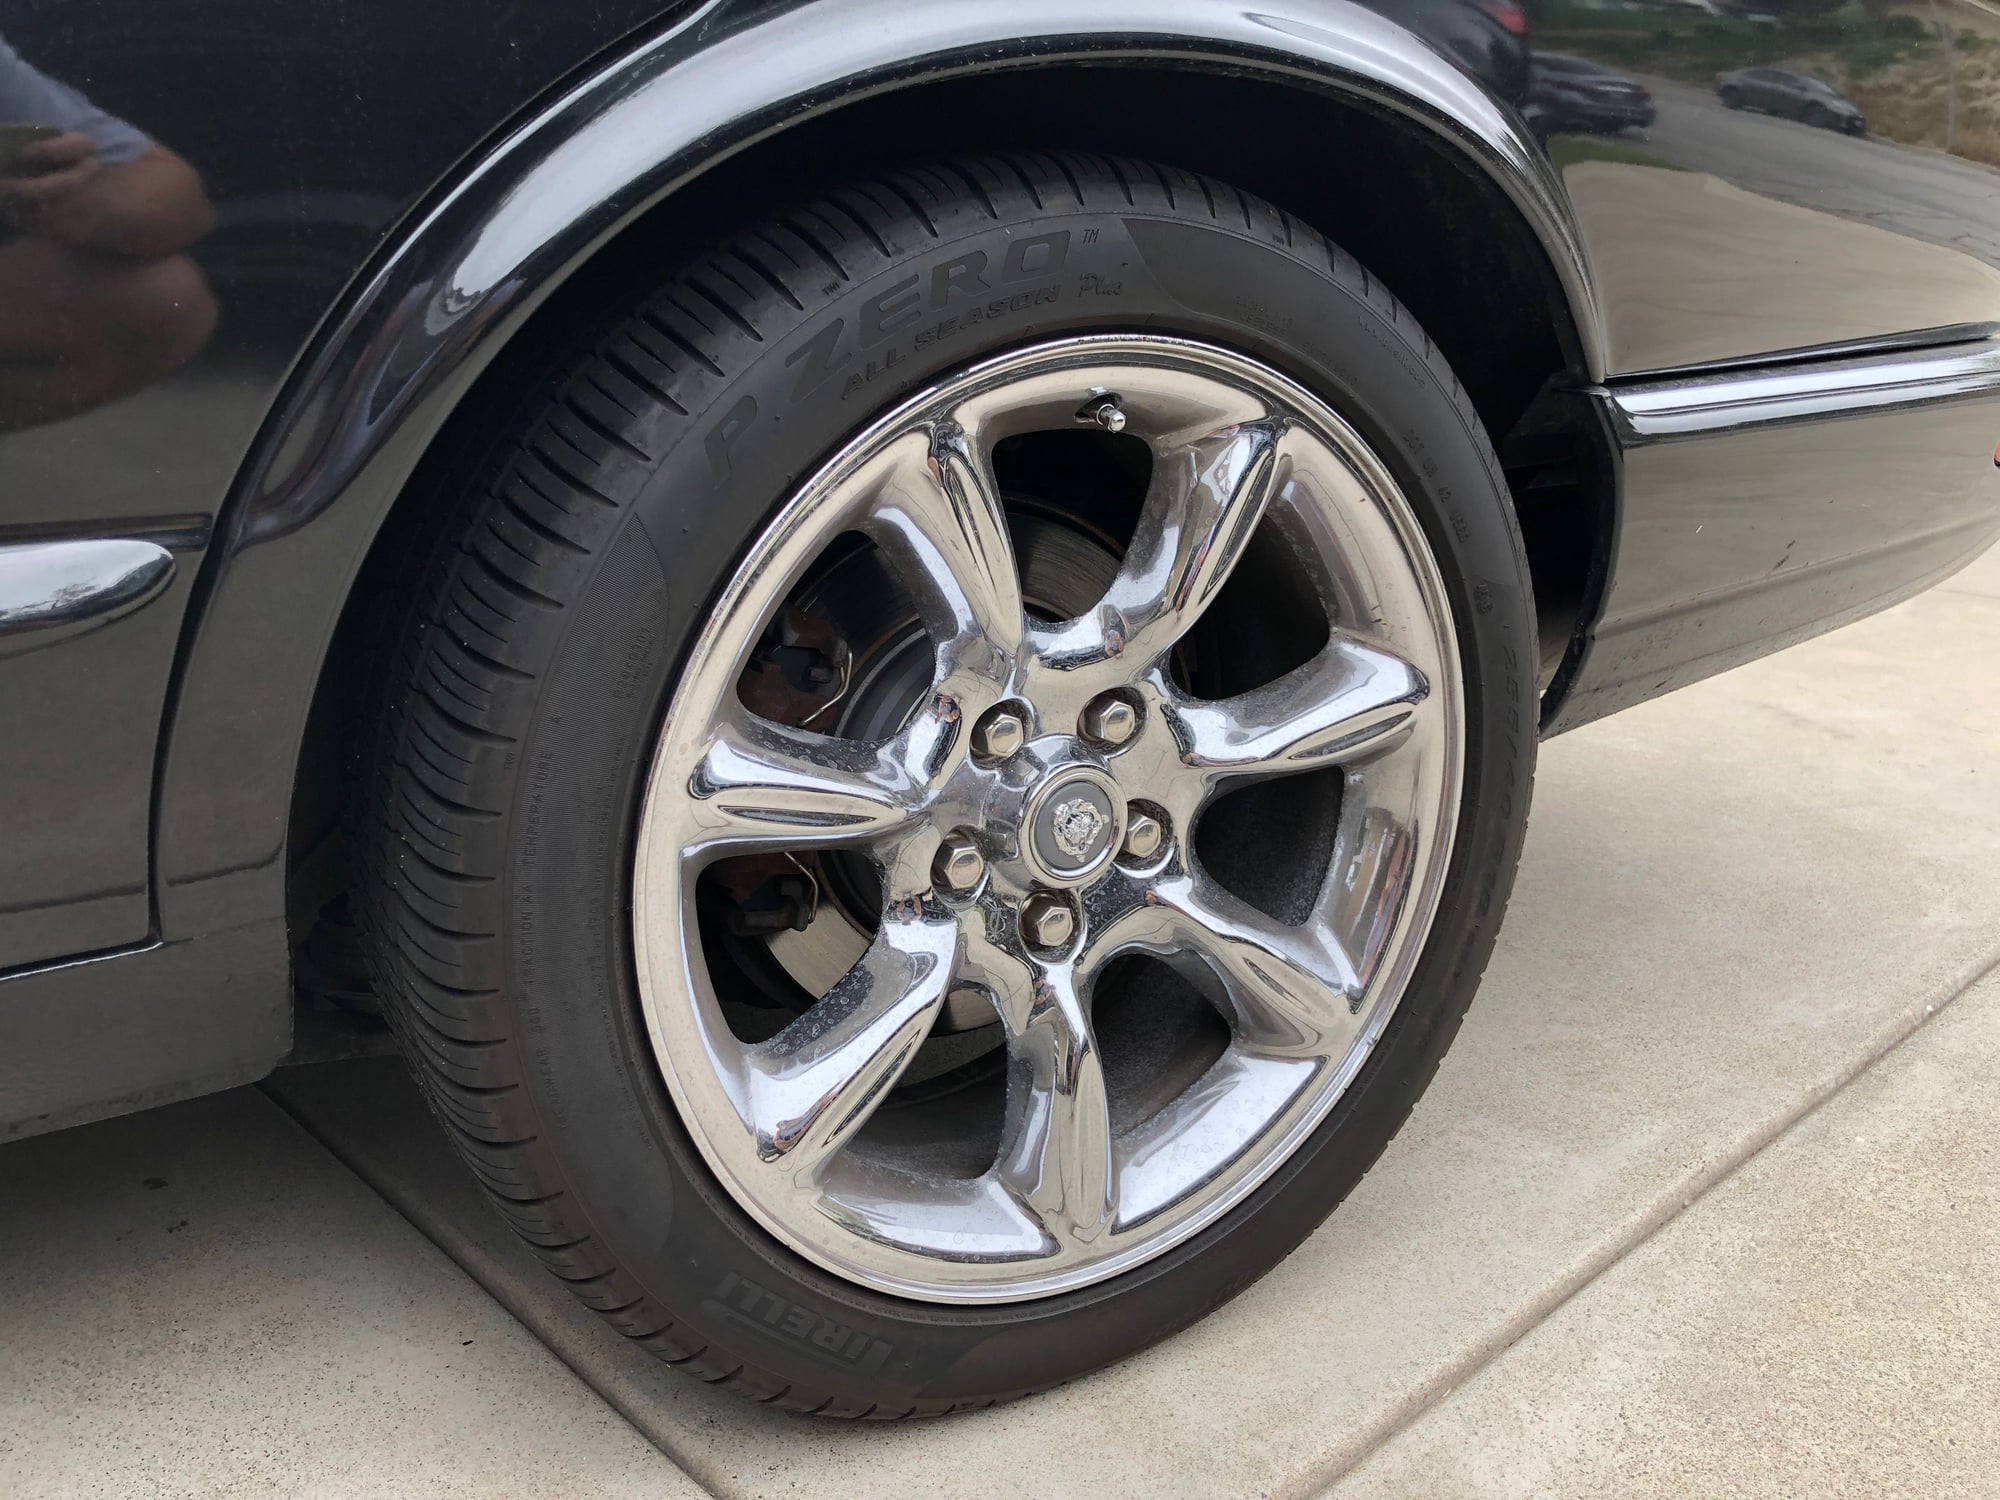 Wheels and Tires/Axles - (4) X308 Chrome Asteroid Wheels 18x8 - Used - 1998 to 2003 Jaguar XJR - Los Angeles, CA 90017, United States